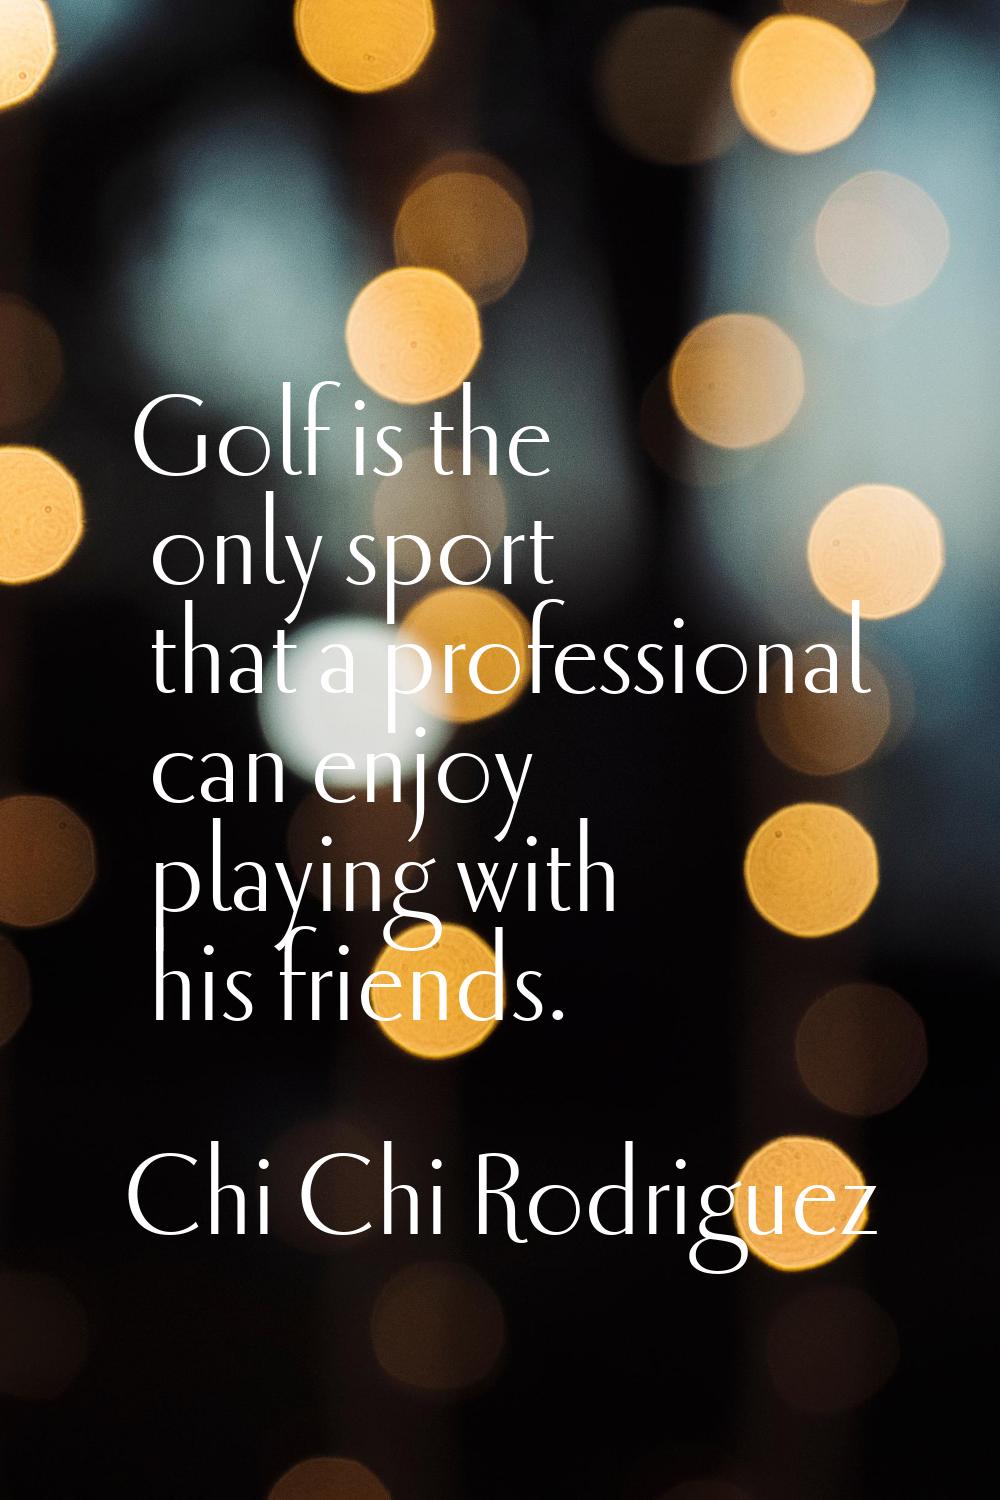 Golf is the only sport that a professional can enjoy playing with his friends.